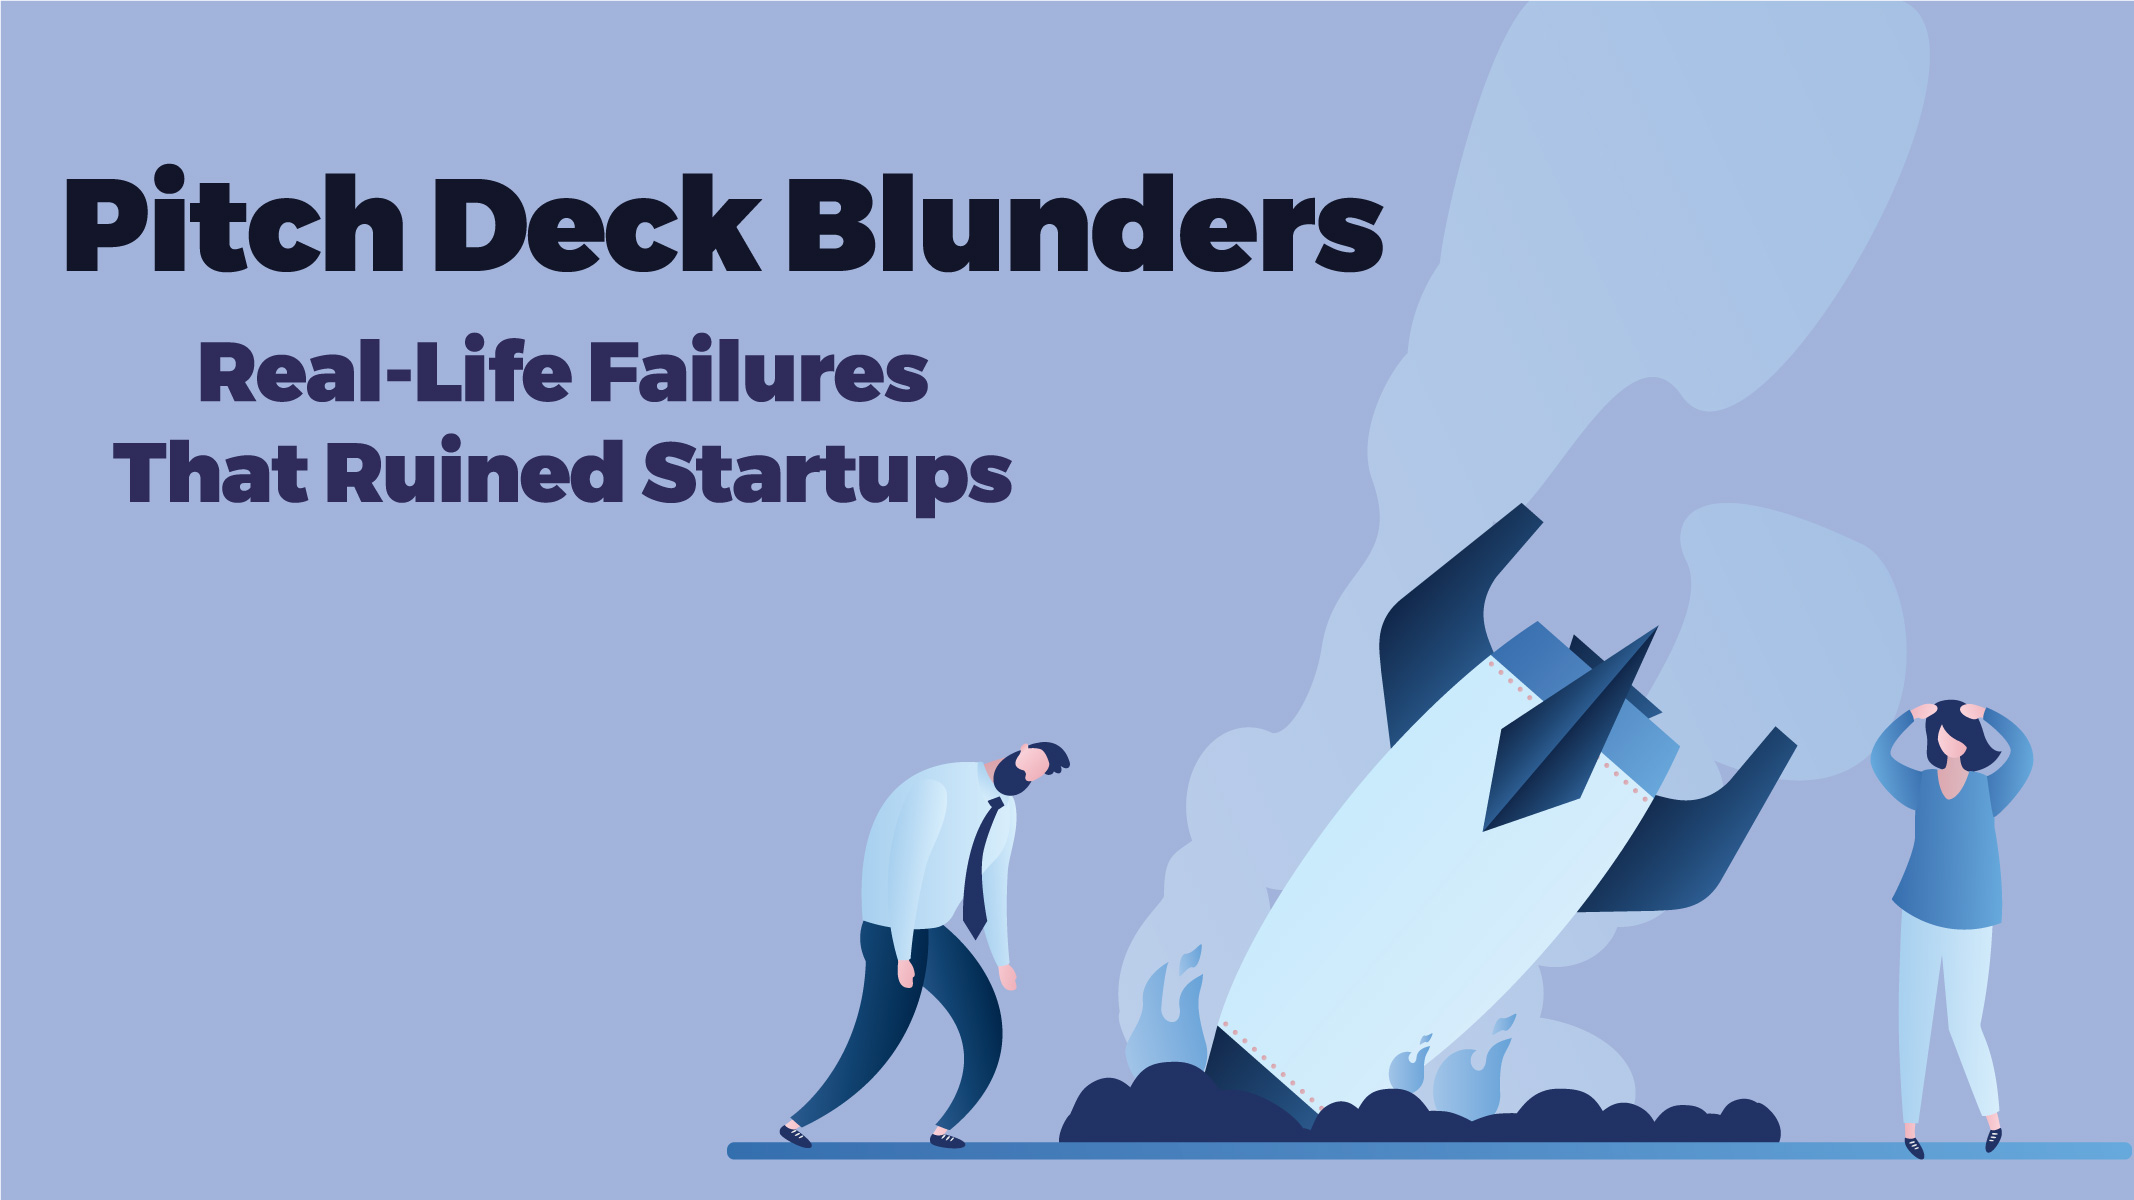 Pitch Deck Blunders